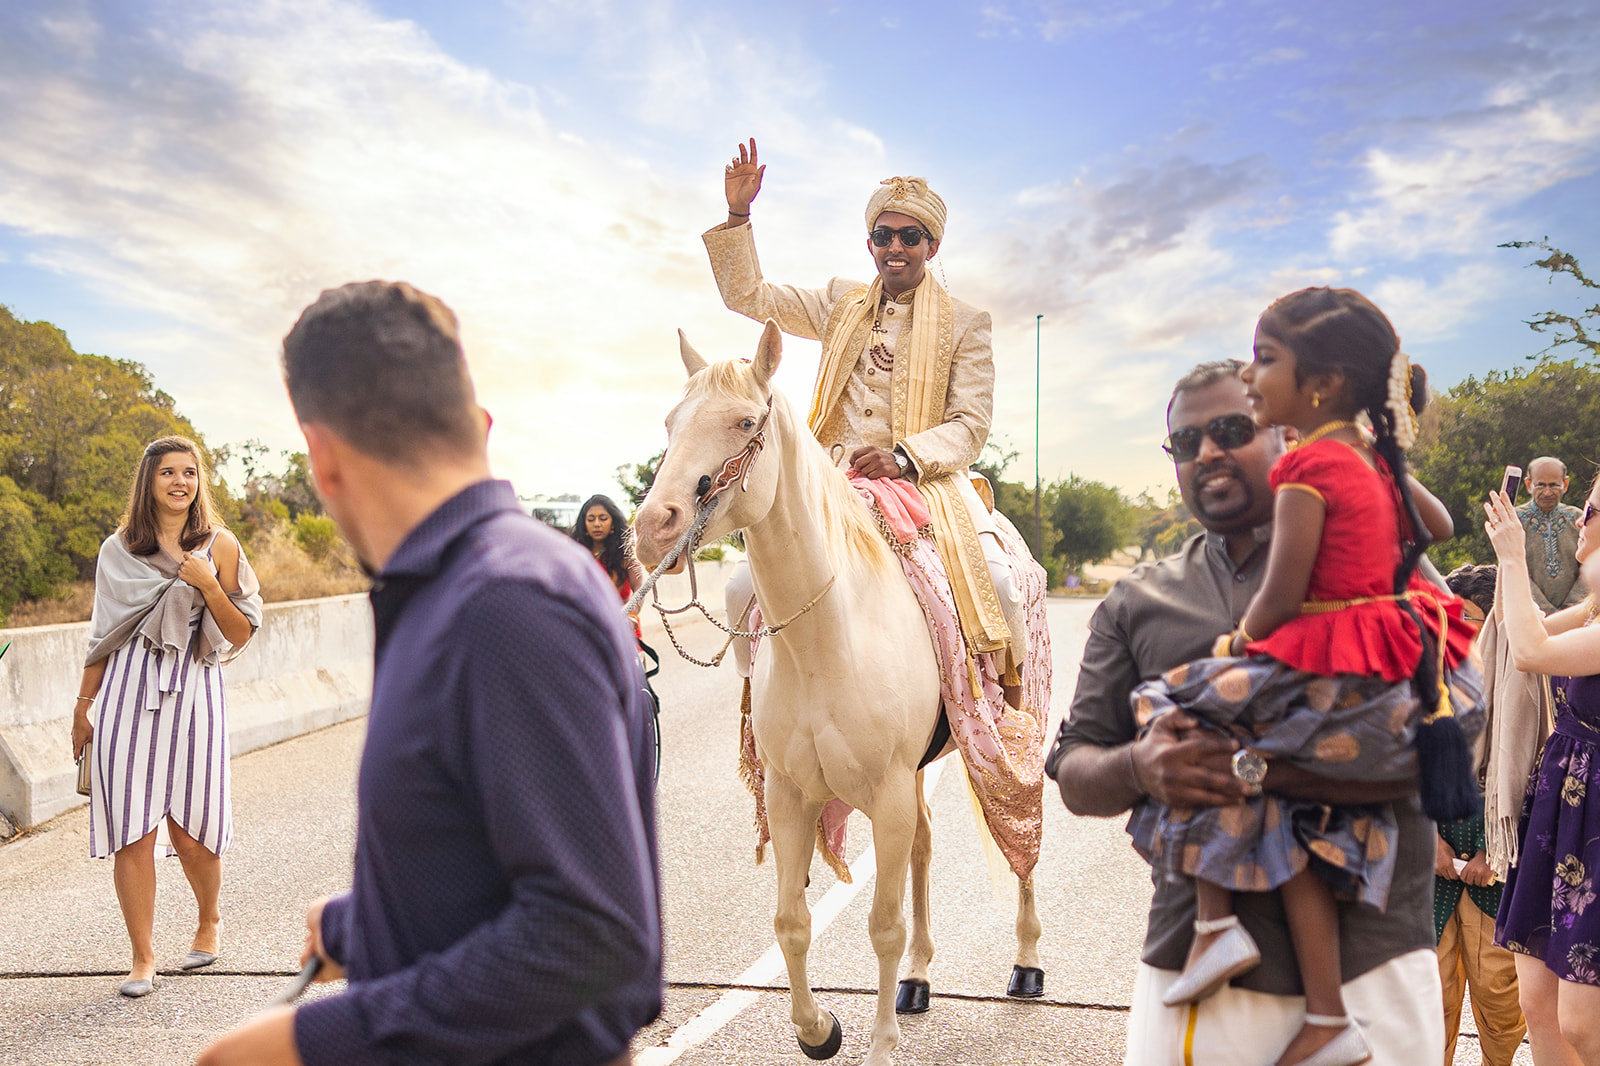 While riding a horse, Indian groom waives to spectators at Indian wedding.